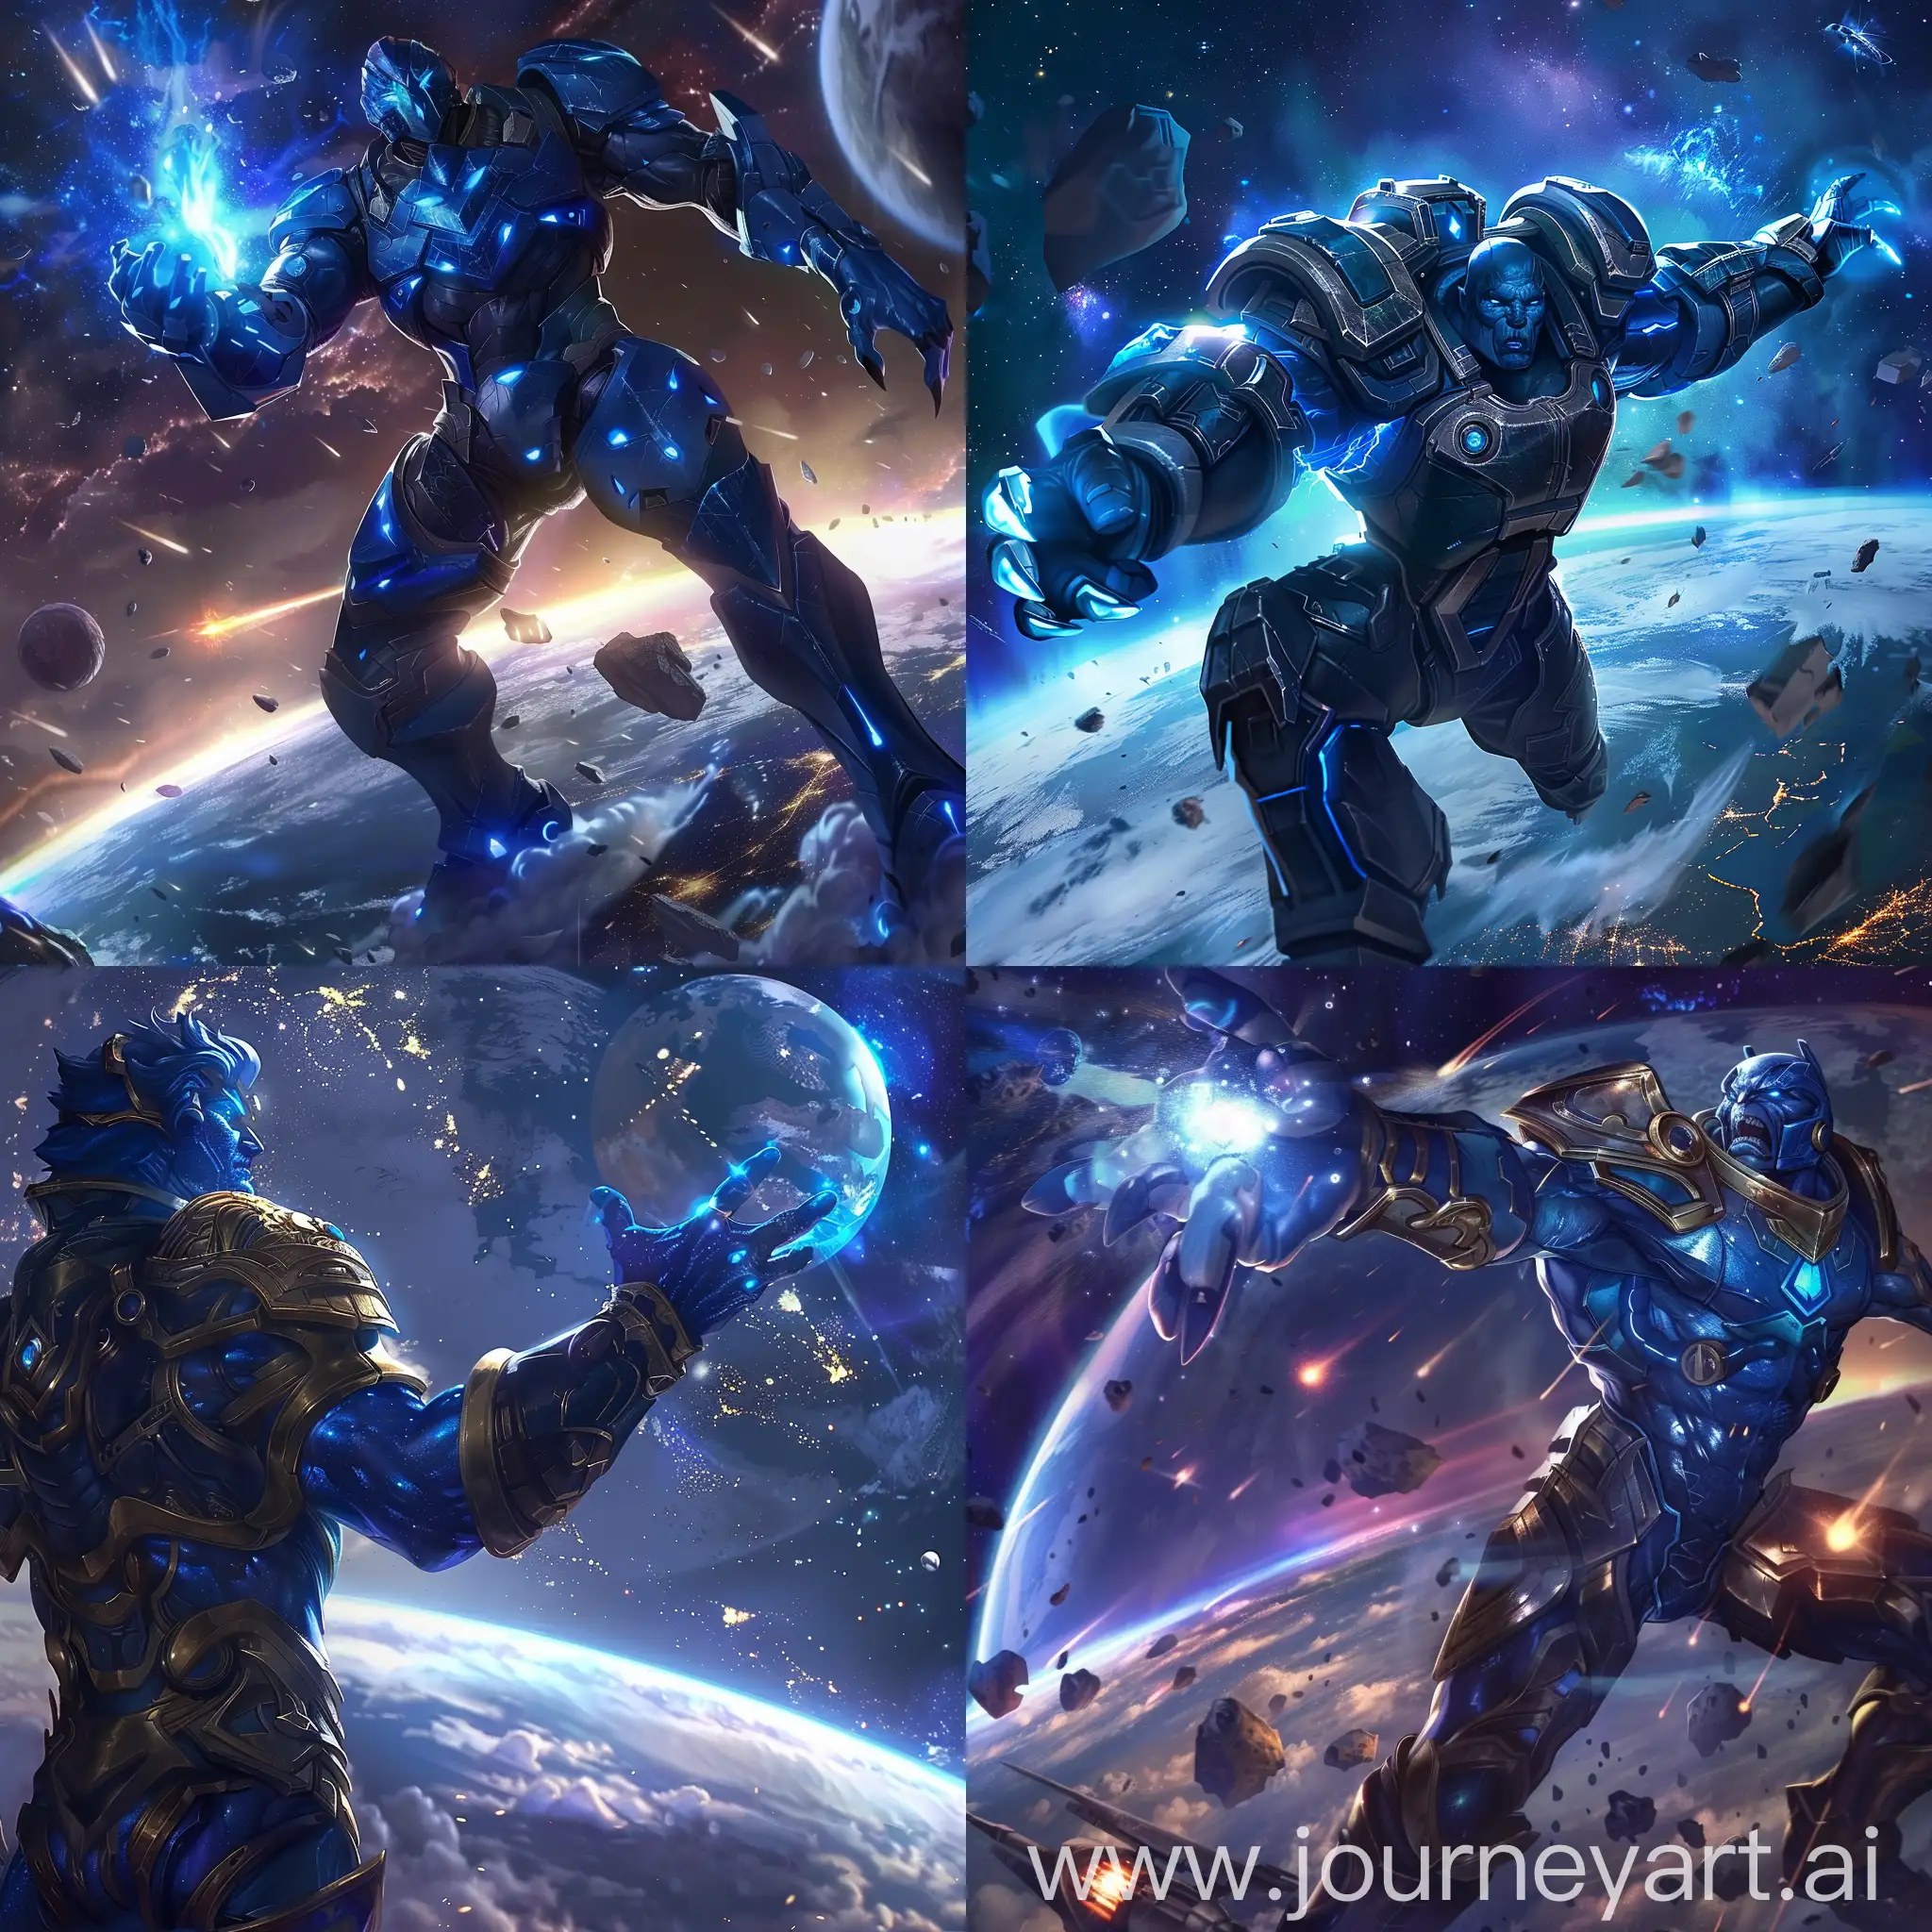  garen league of legends character defending the earth from space in blue skin